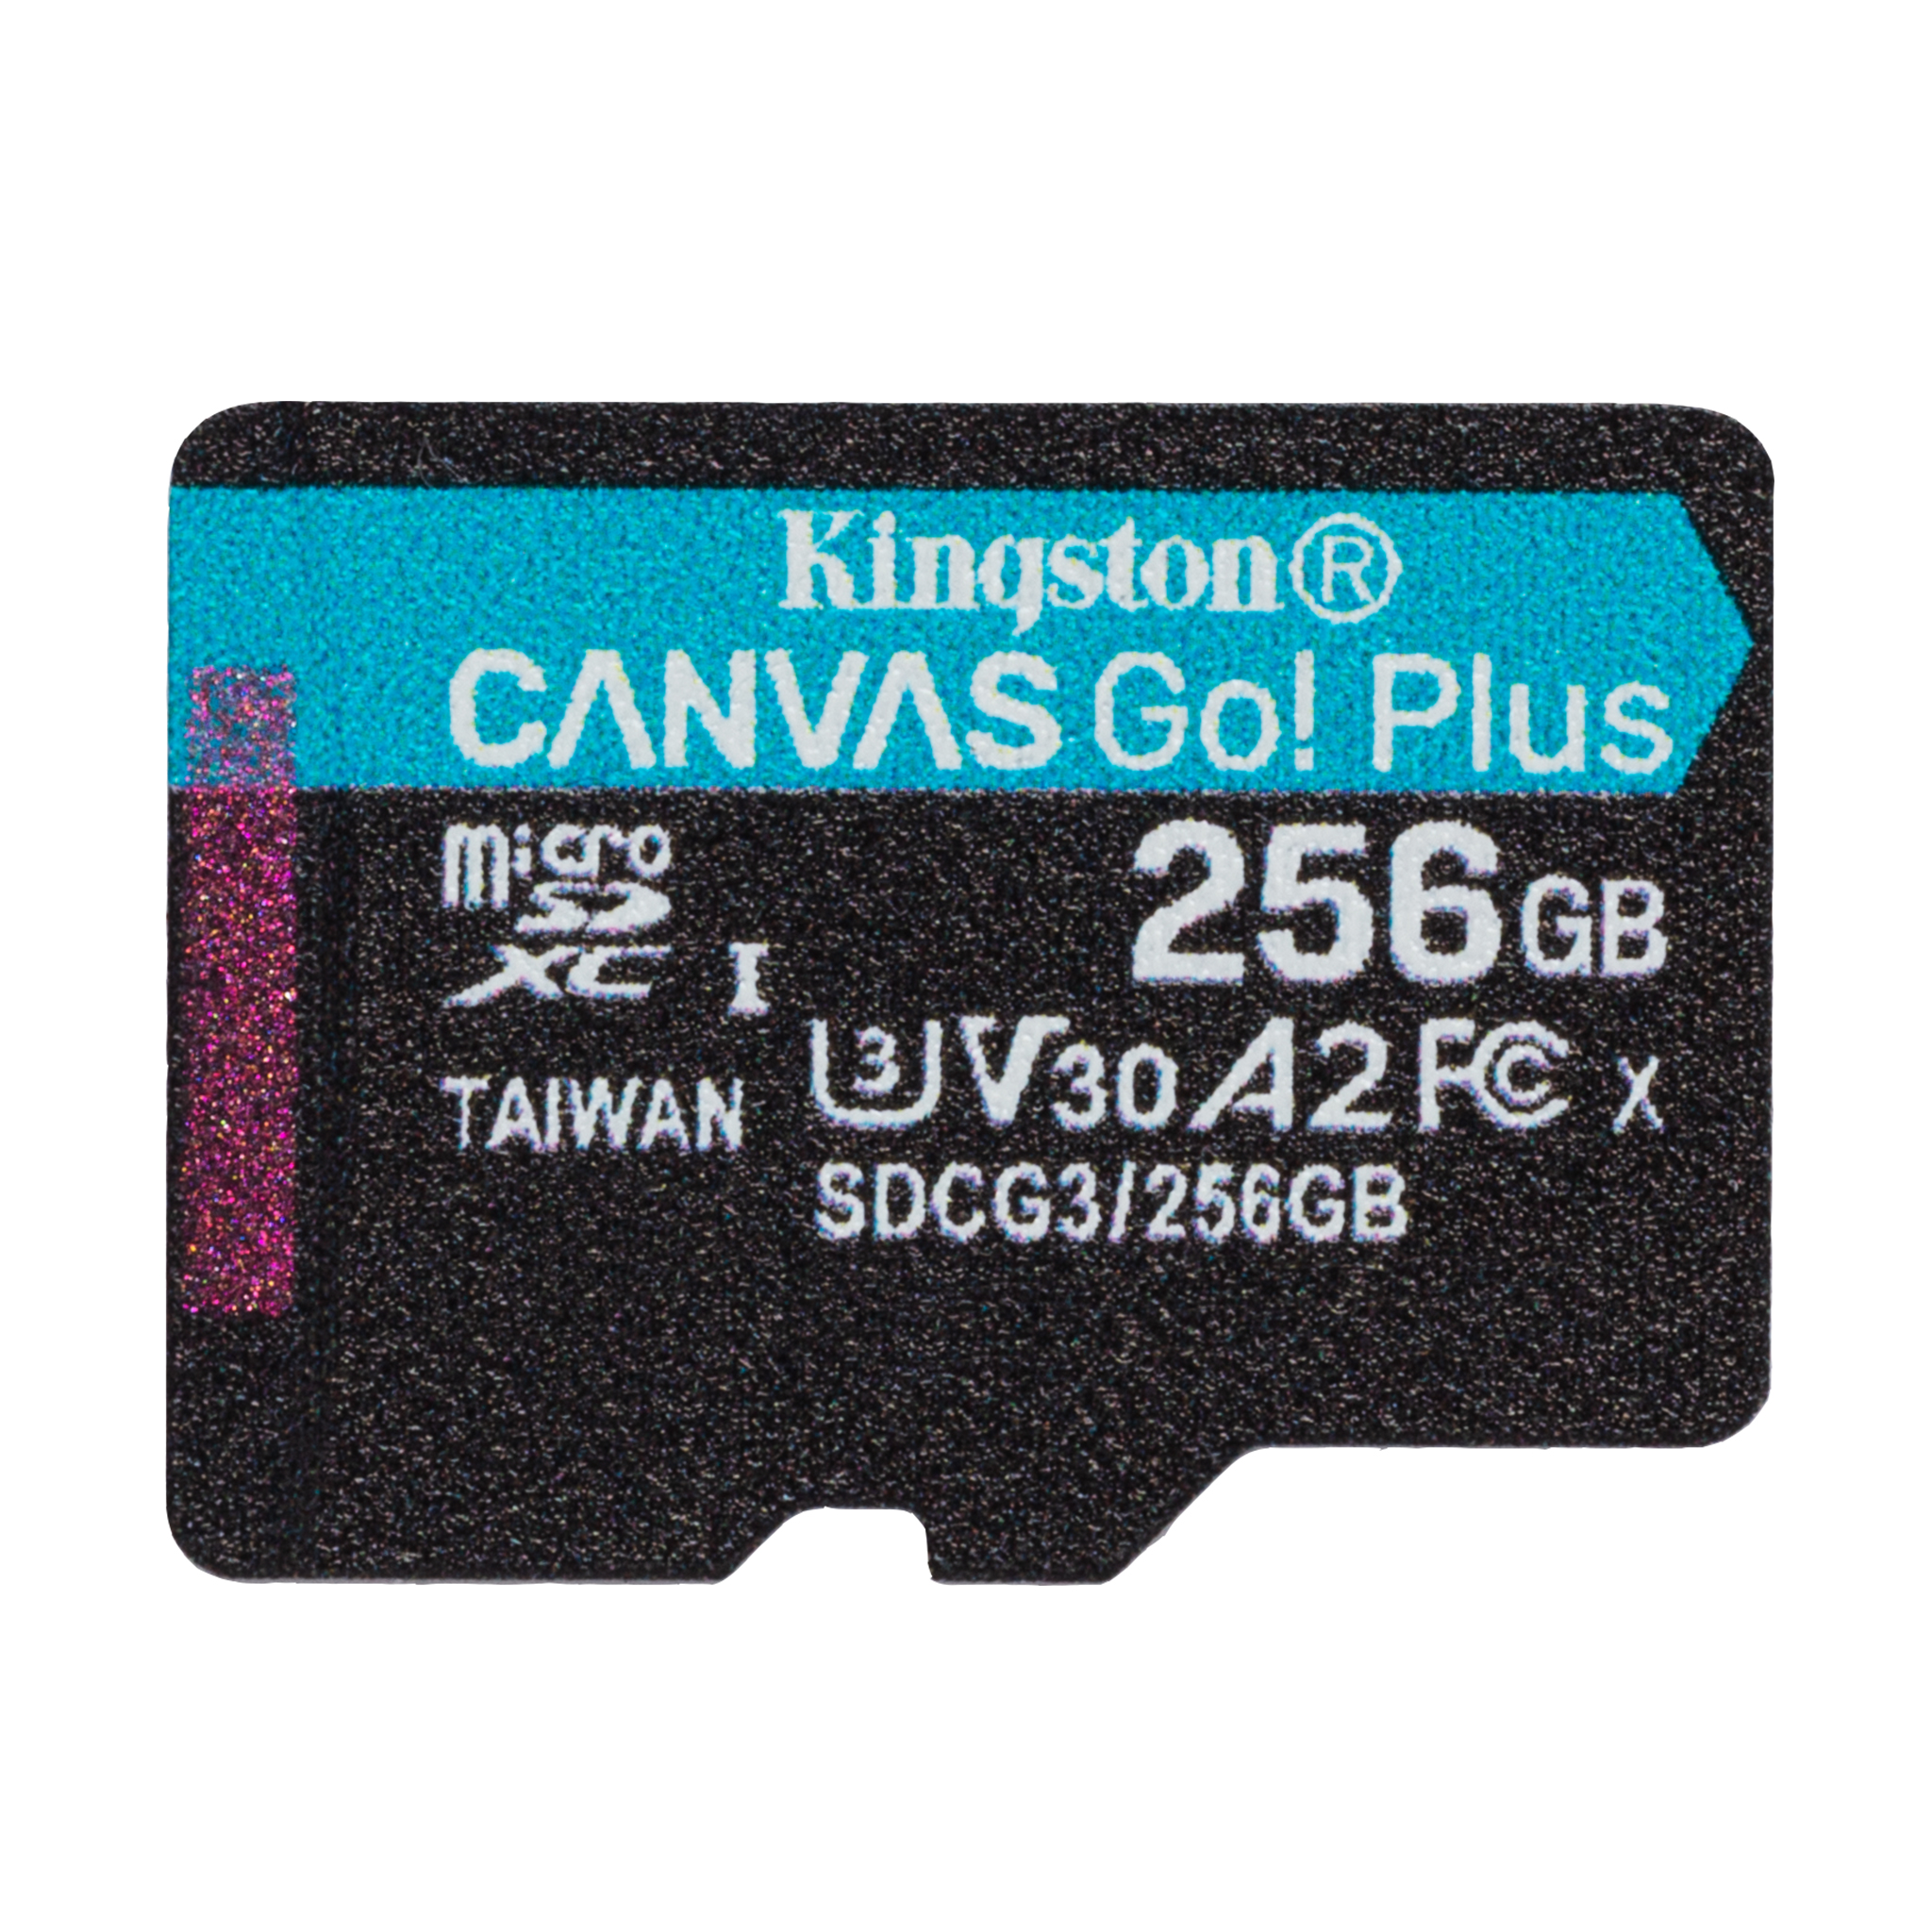 SanFlash Kingston 64GB React MicroSDXC for Samsung SM-A905 with SD Adapter 100MBs Works with Kingston